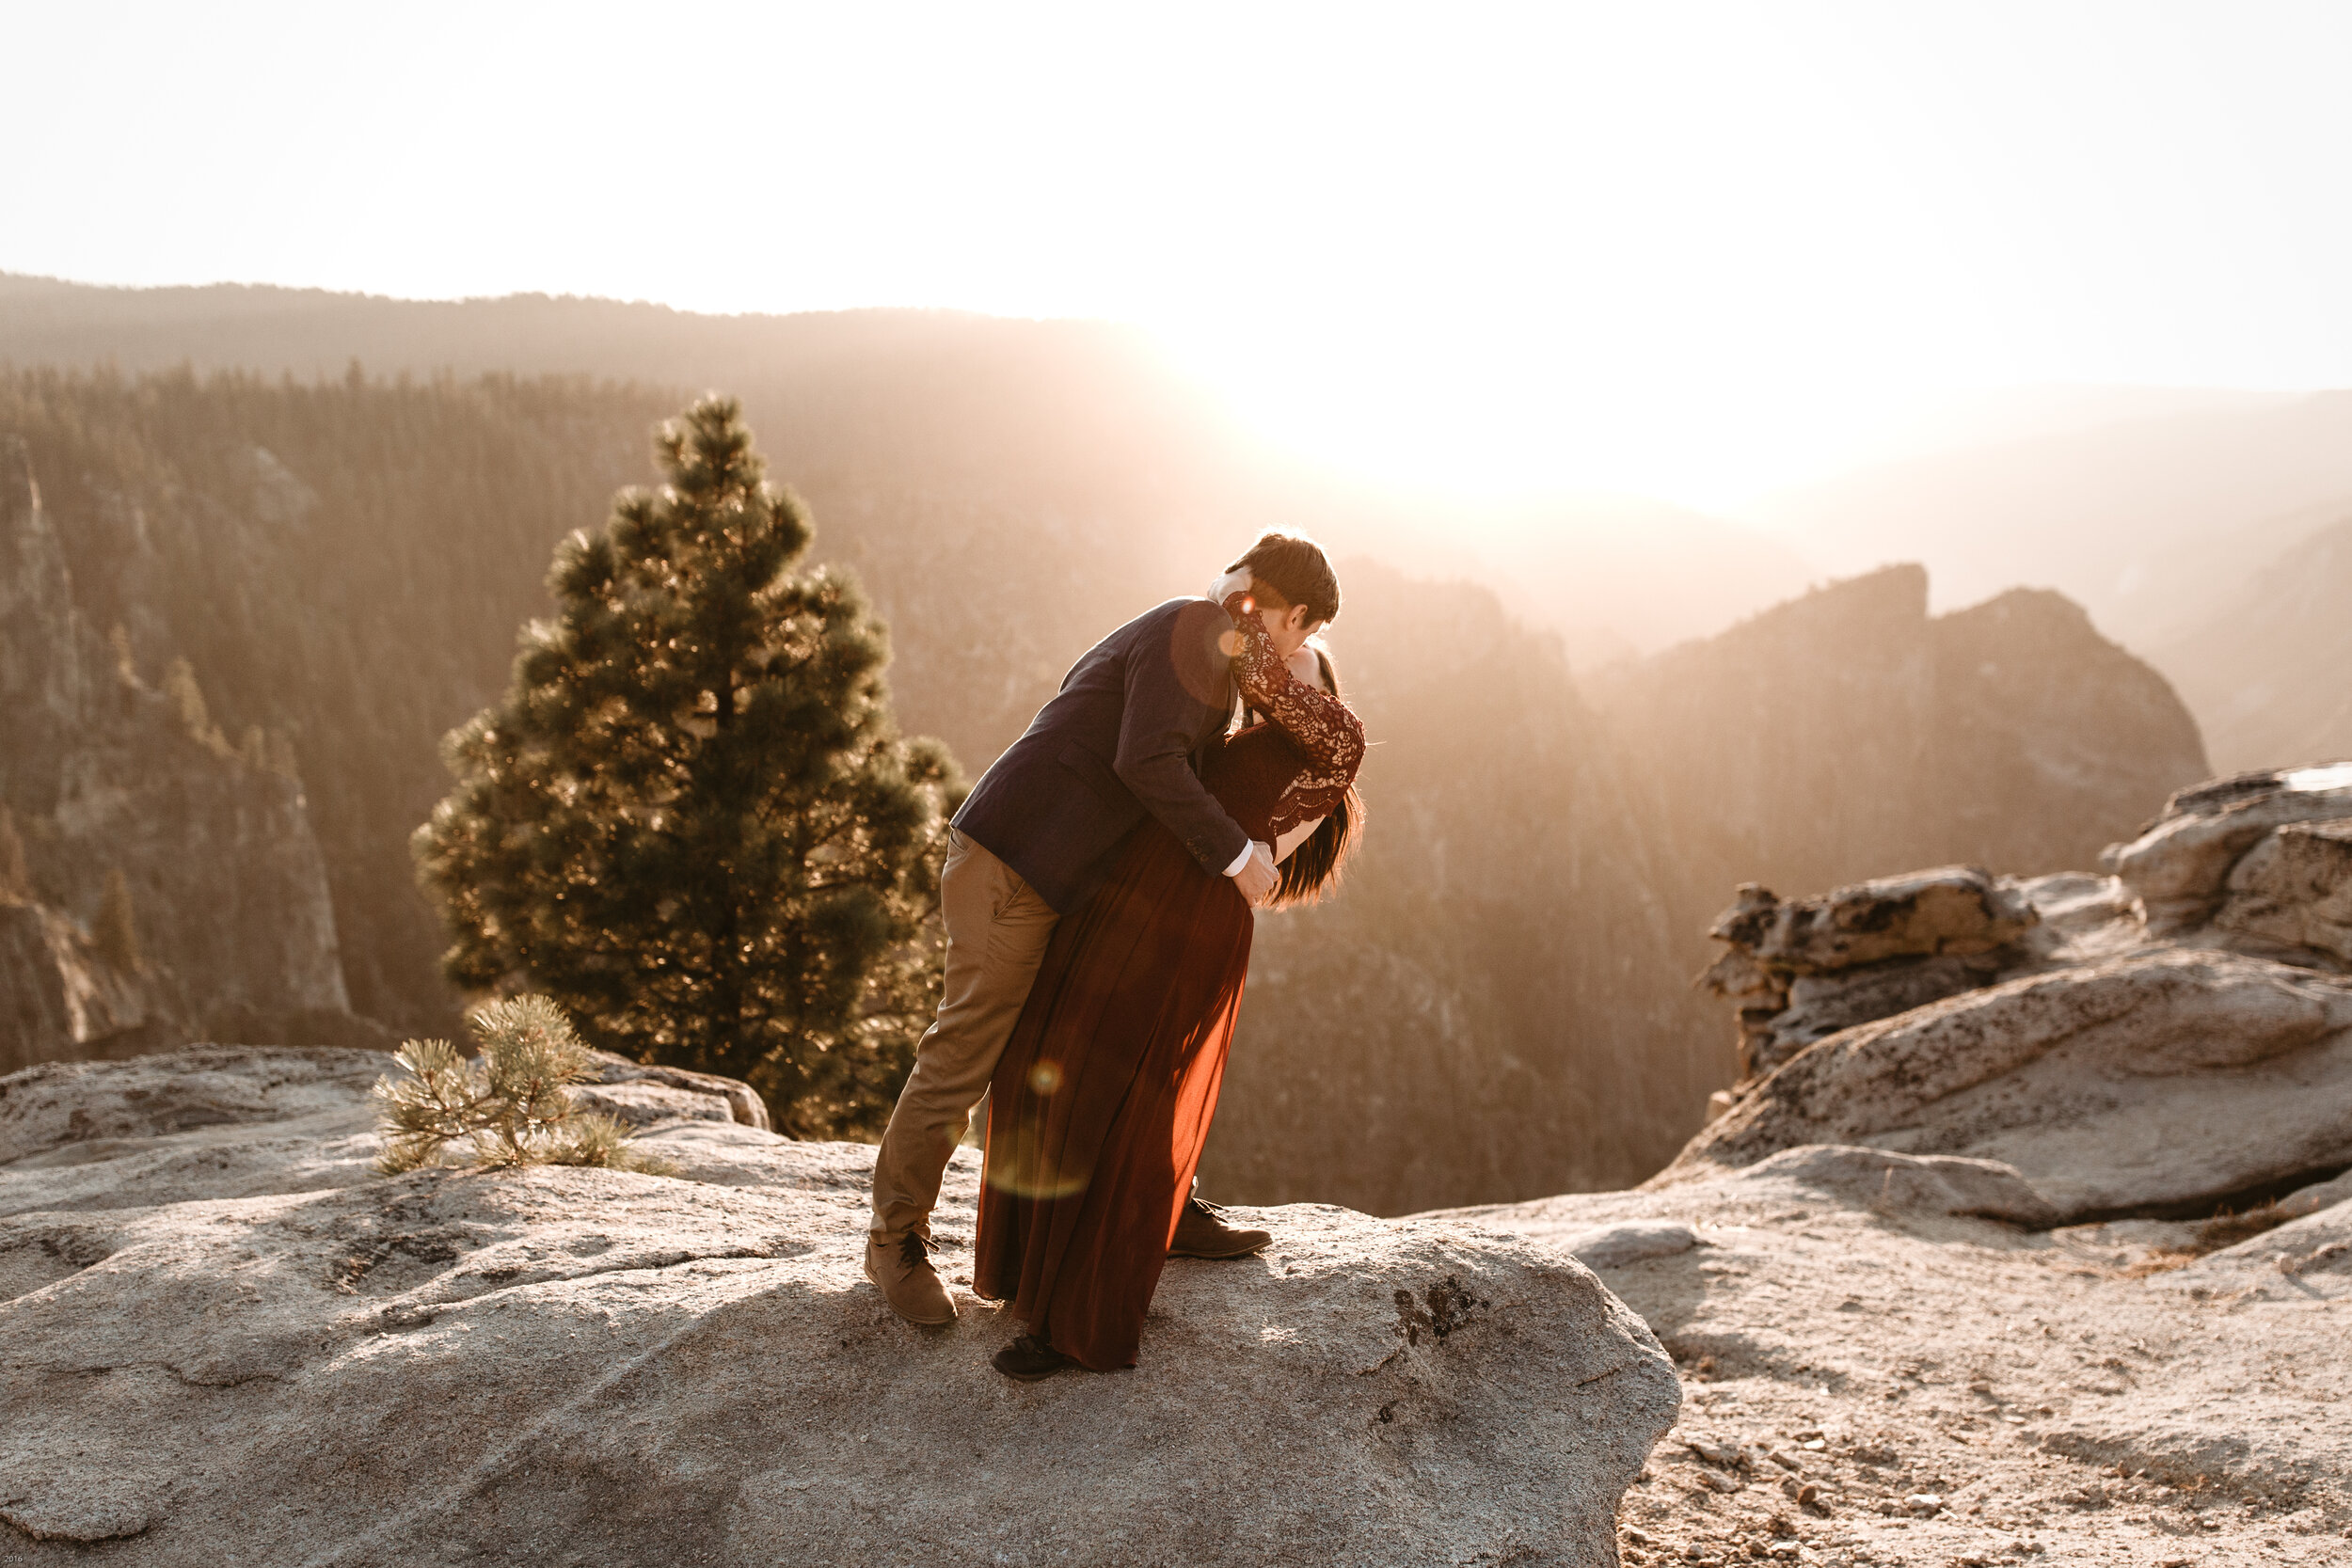 yosemite-national-park-couples-session-at-taft-point-and-yosemite-valley-yosemite-elopement-photographer-nicole-daacke-photography-144.jpg